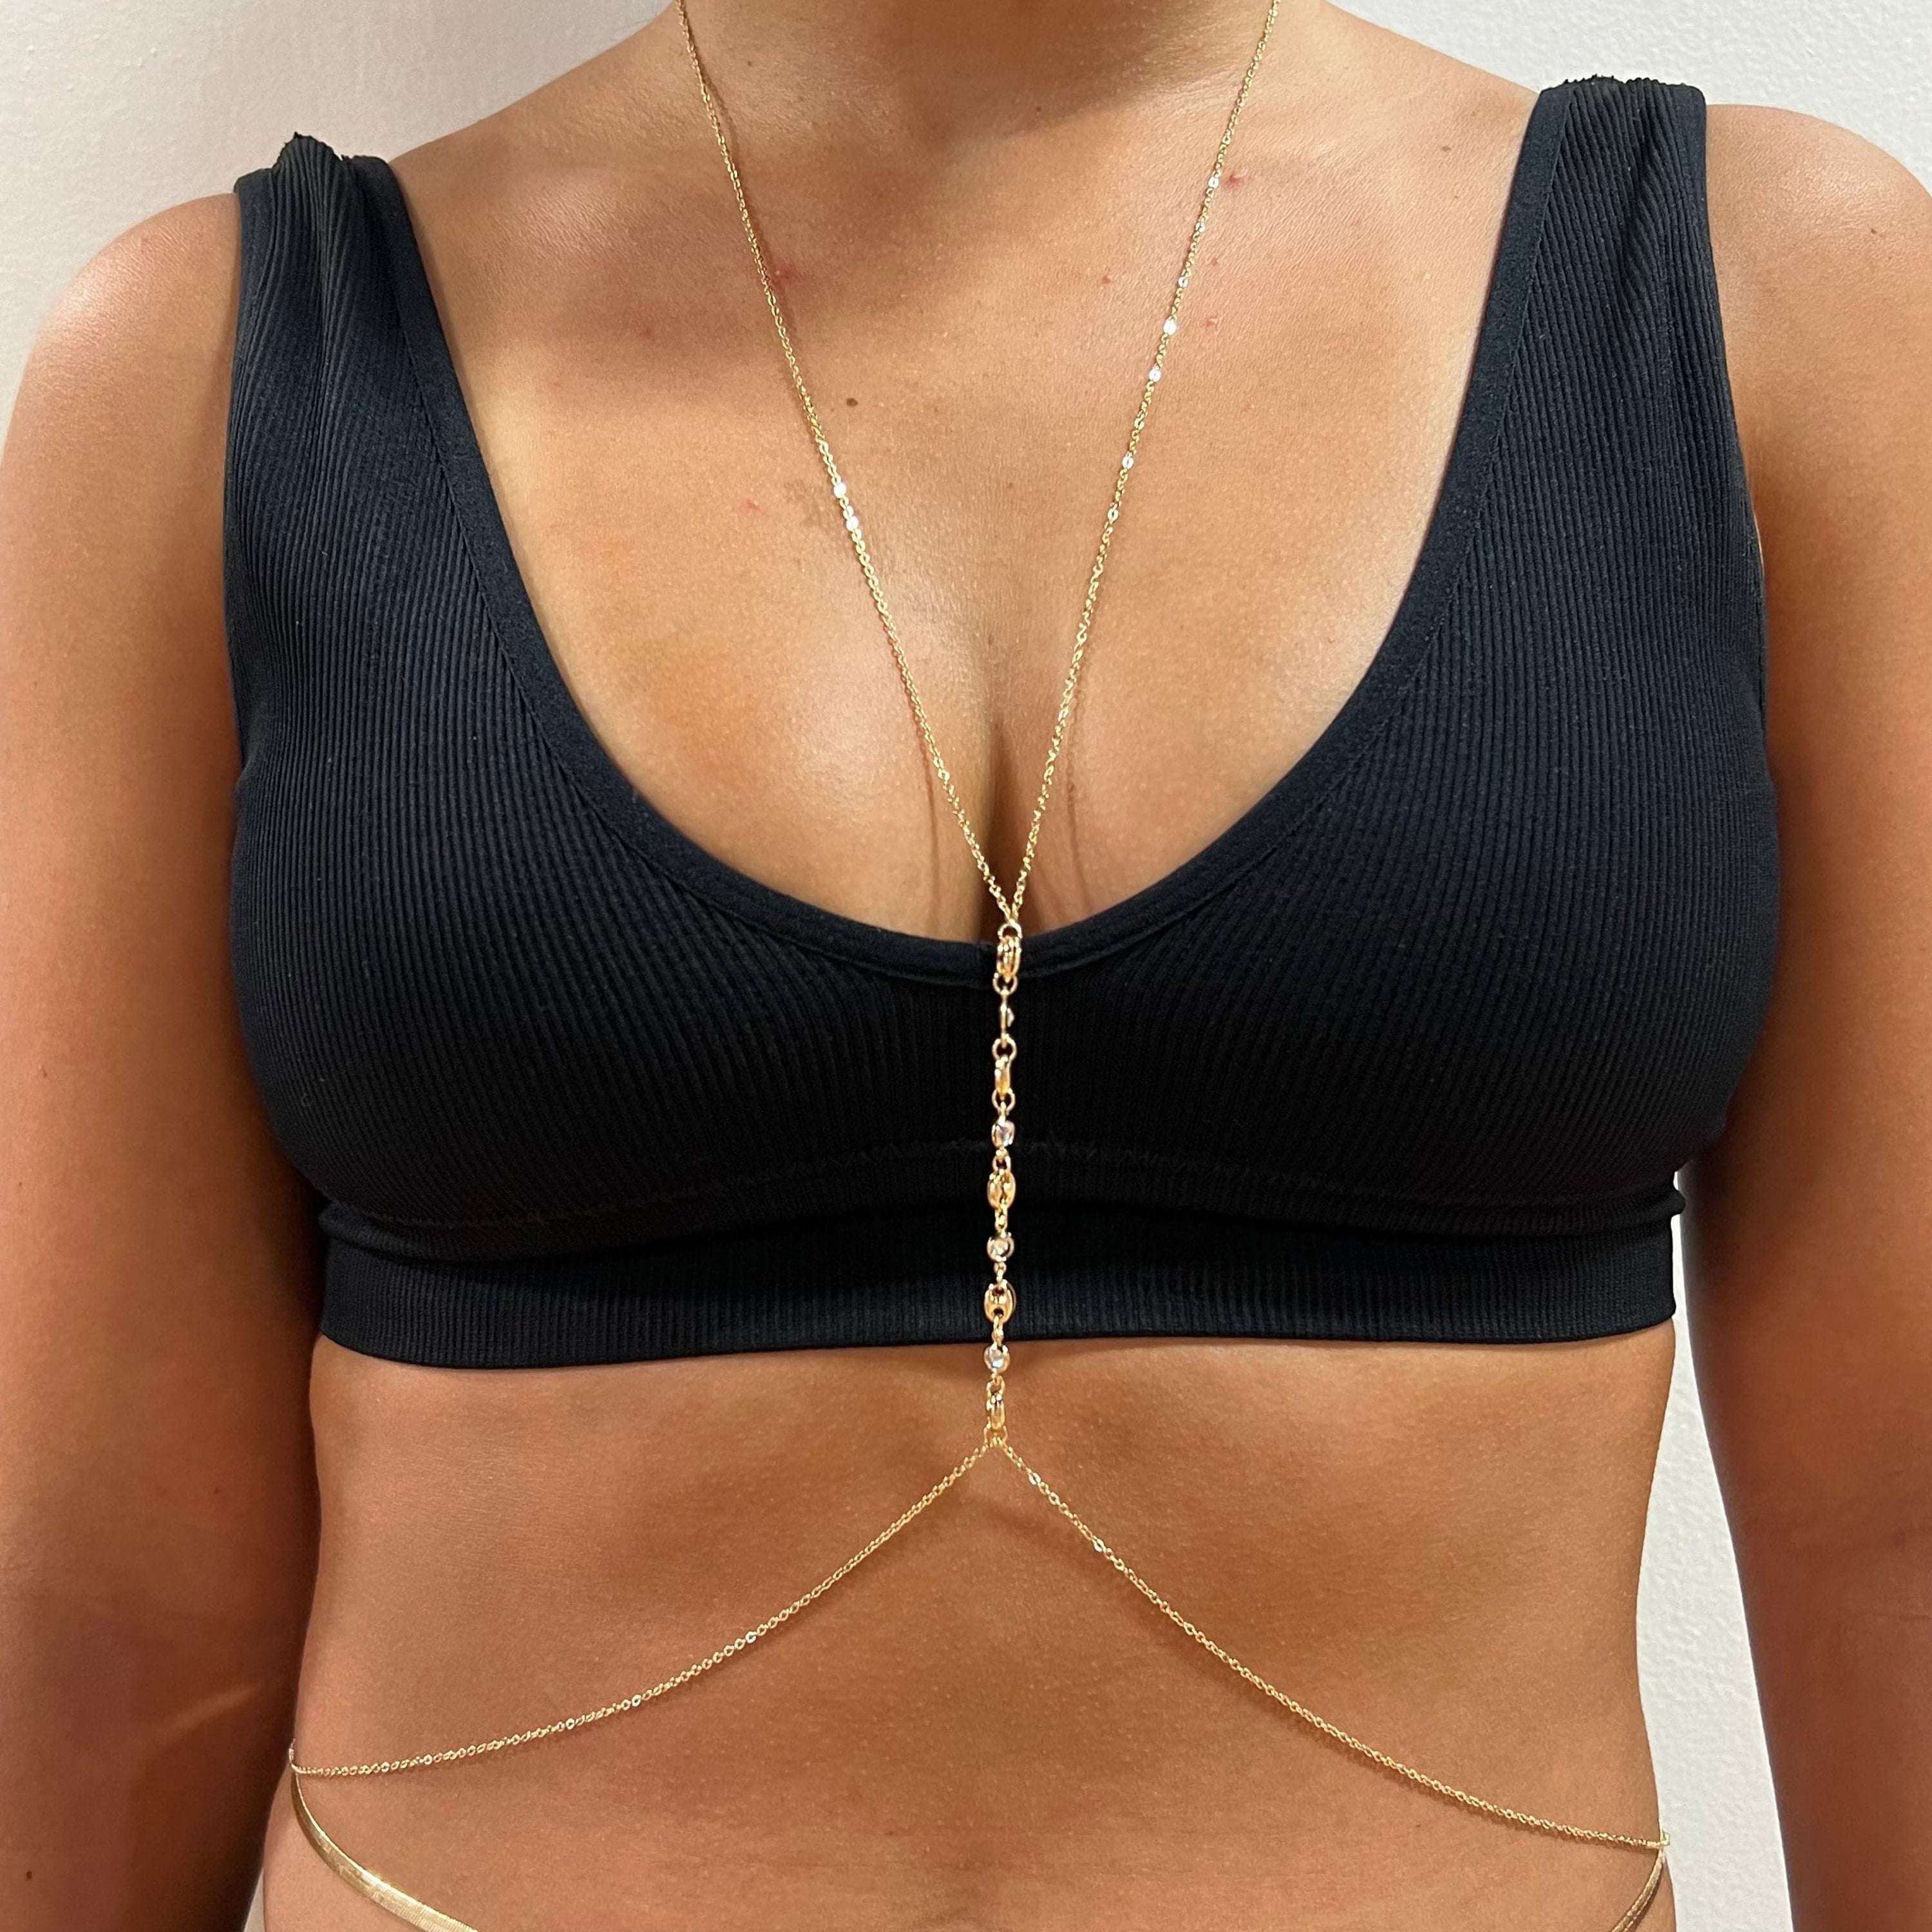 Gold Chain Harness Bralette Set - Embrace Sensual Glamour By